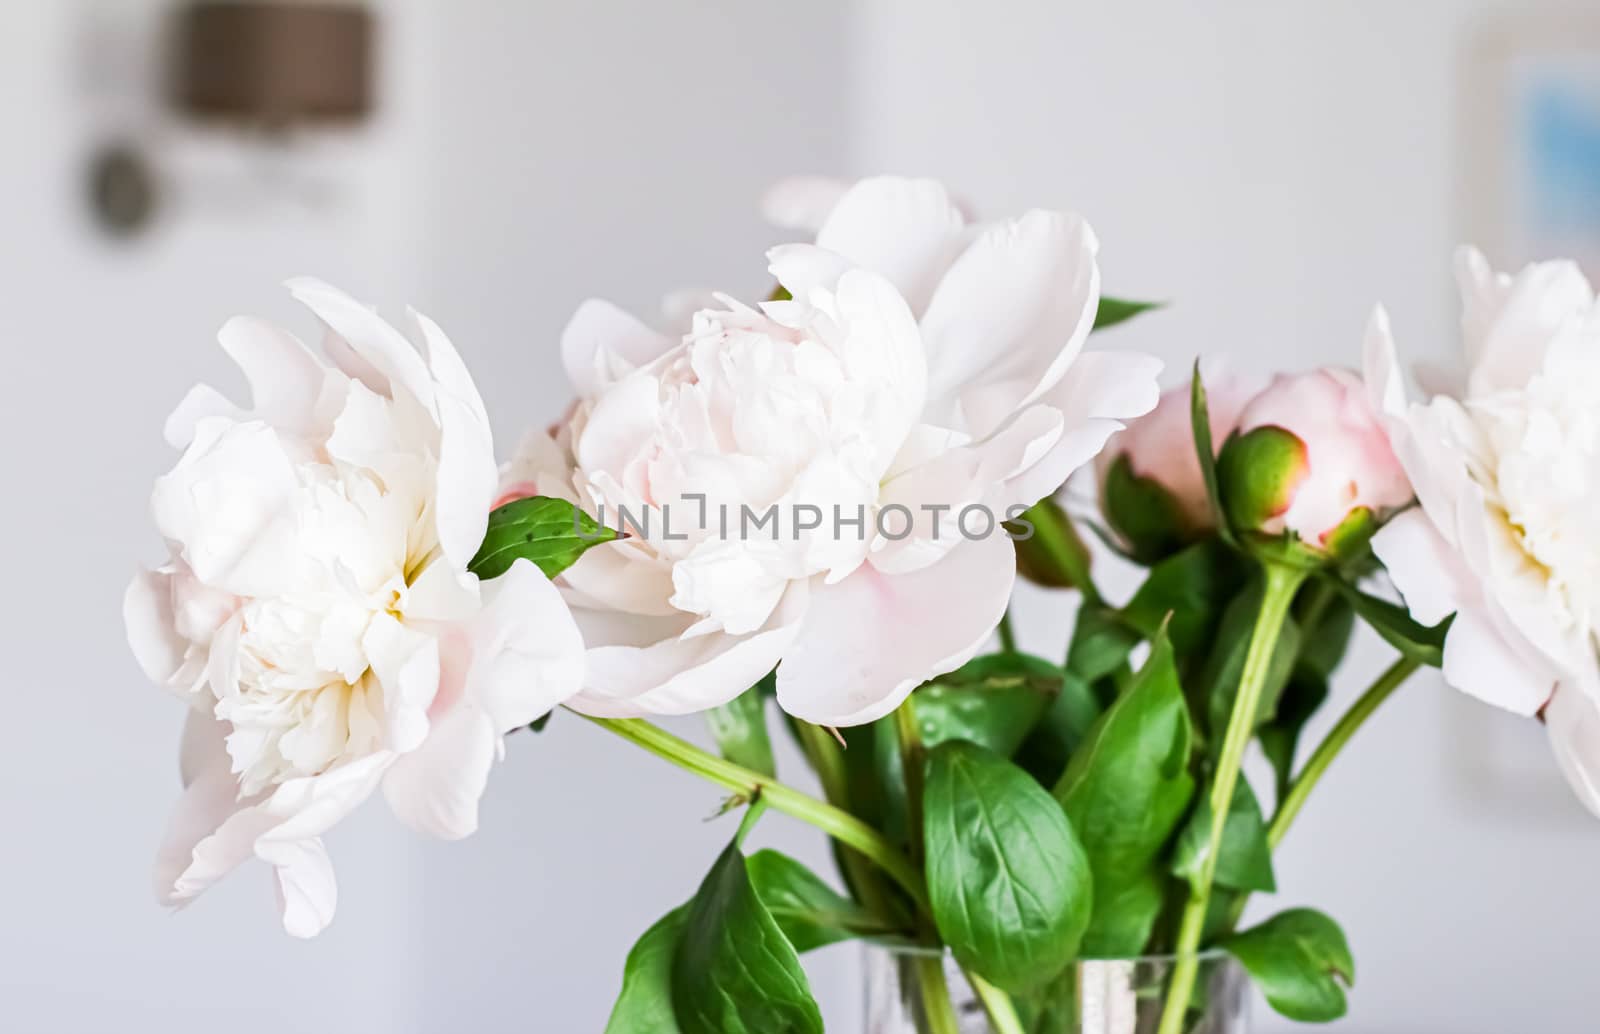 Chic bouquet of peony flowers in vase as home decor idea, luxury interior design and decoration by Anneleven